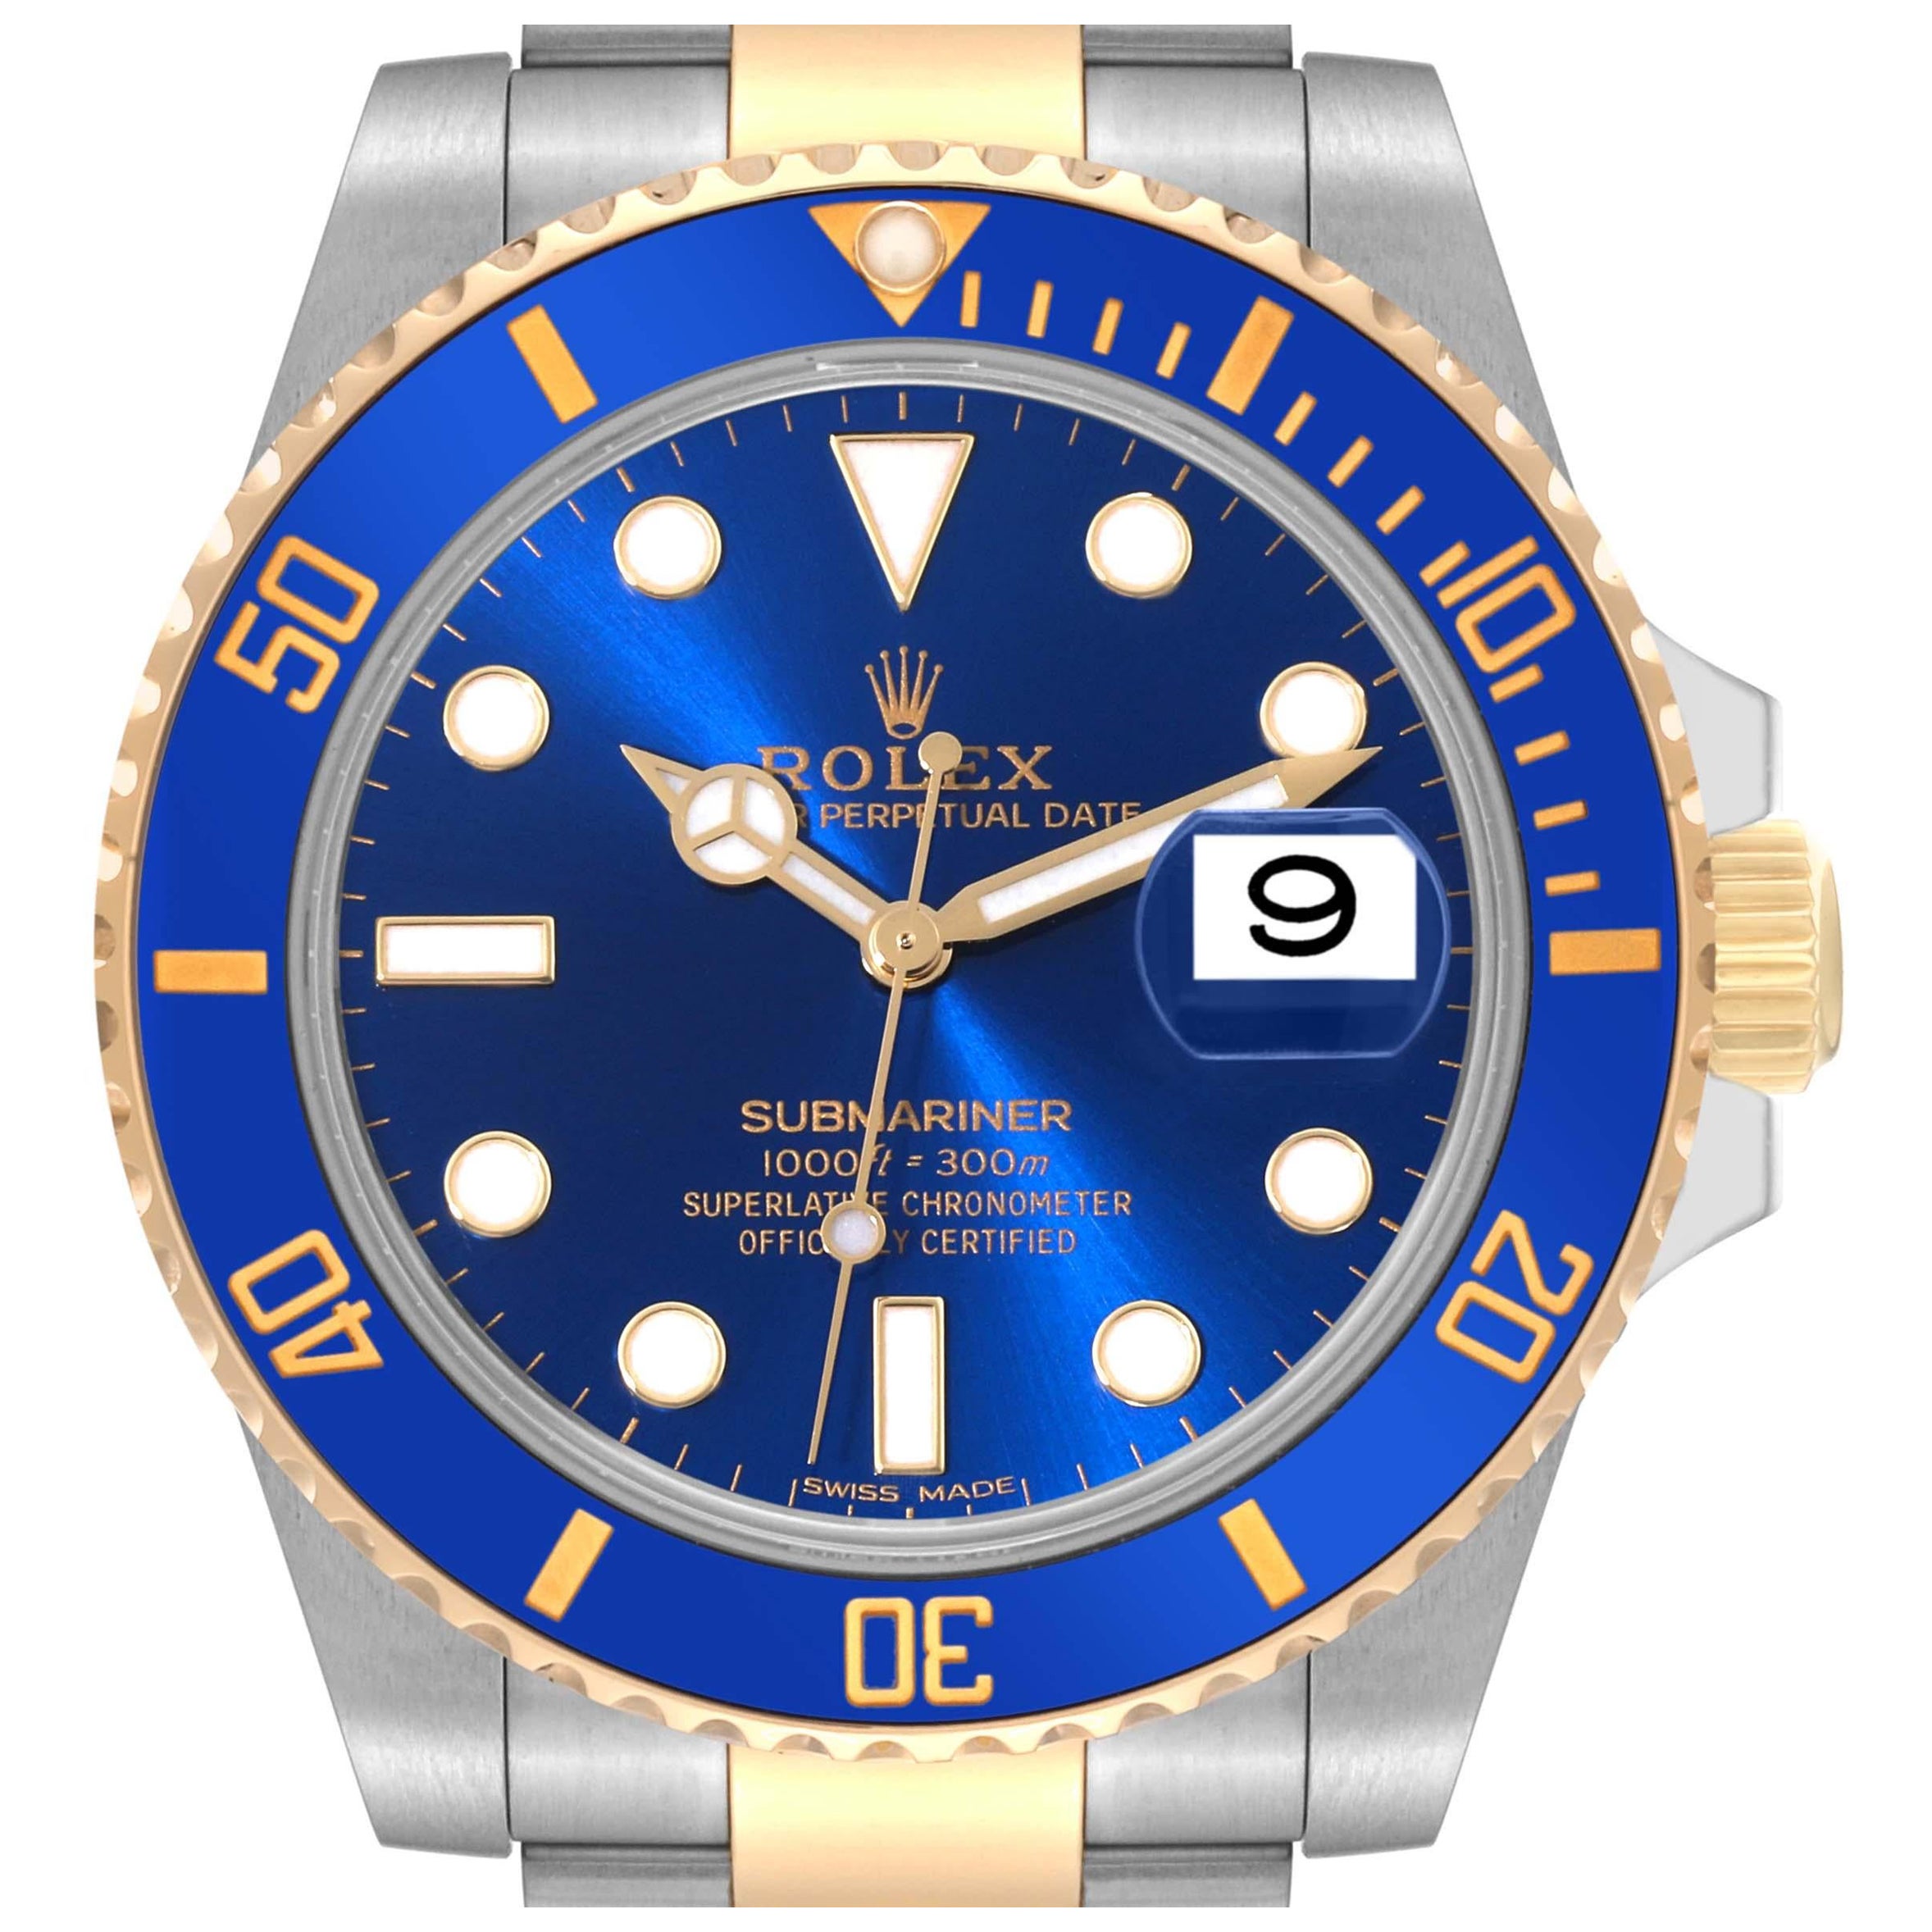 Rolex Submariner Steel Yellow Gold Blue Dial Mens Watch 116613